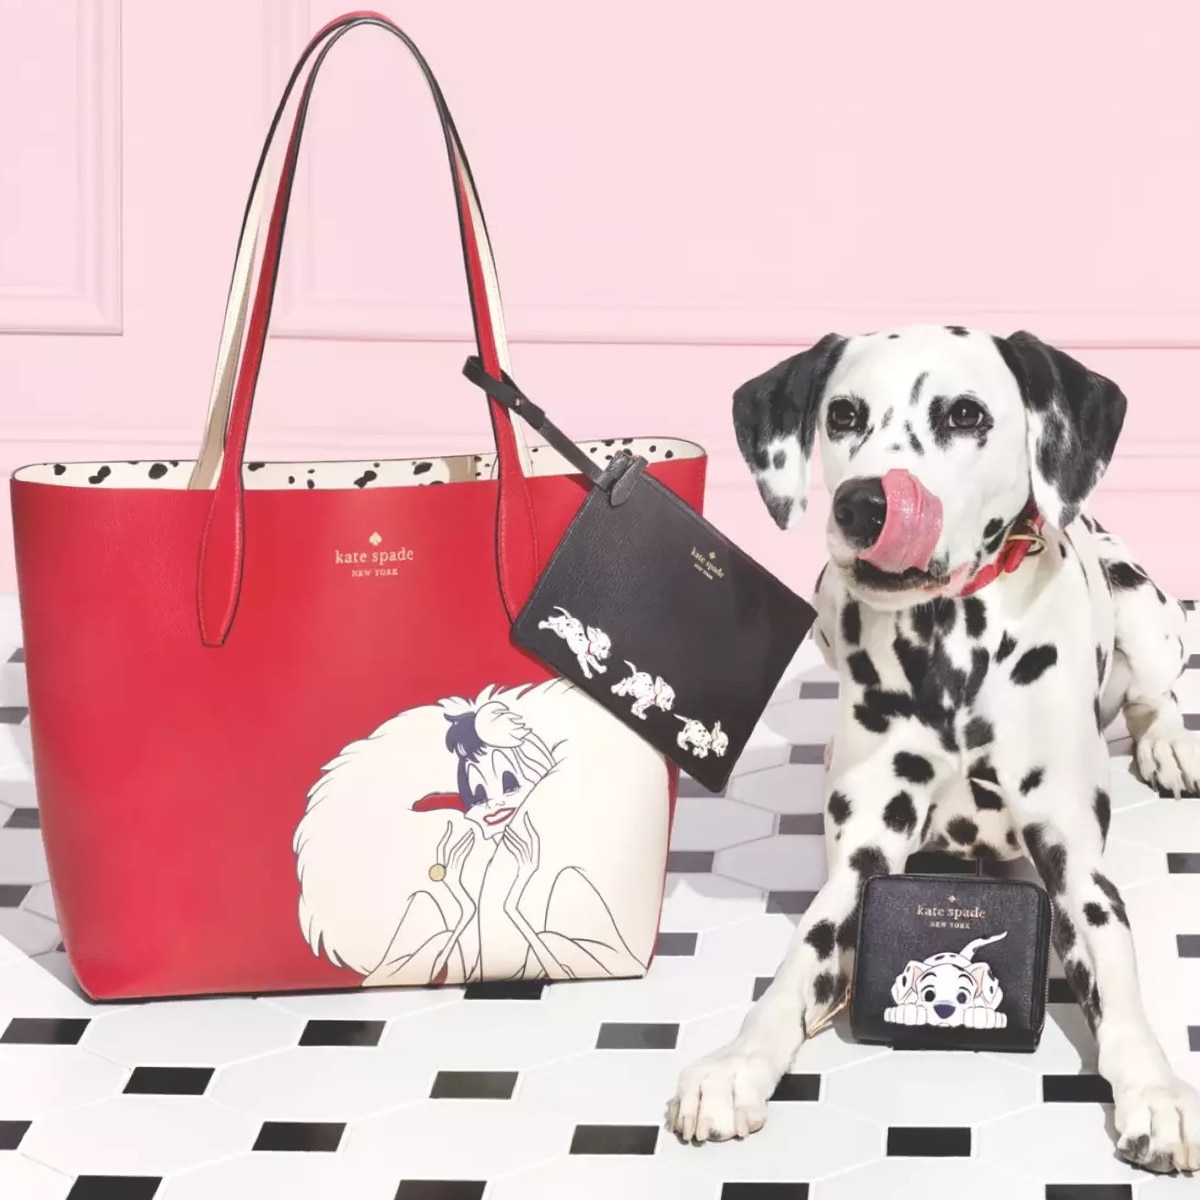 Ecomm, Kate Spade Surprise 20 off